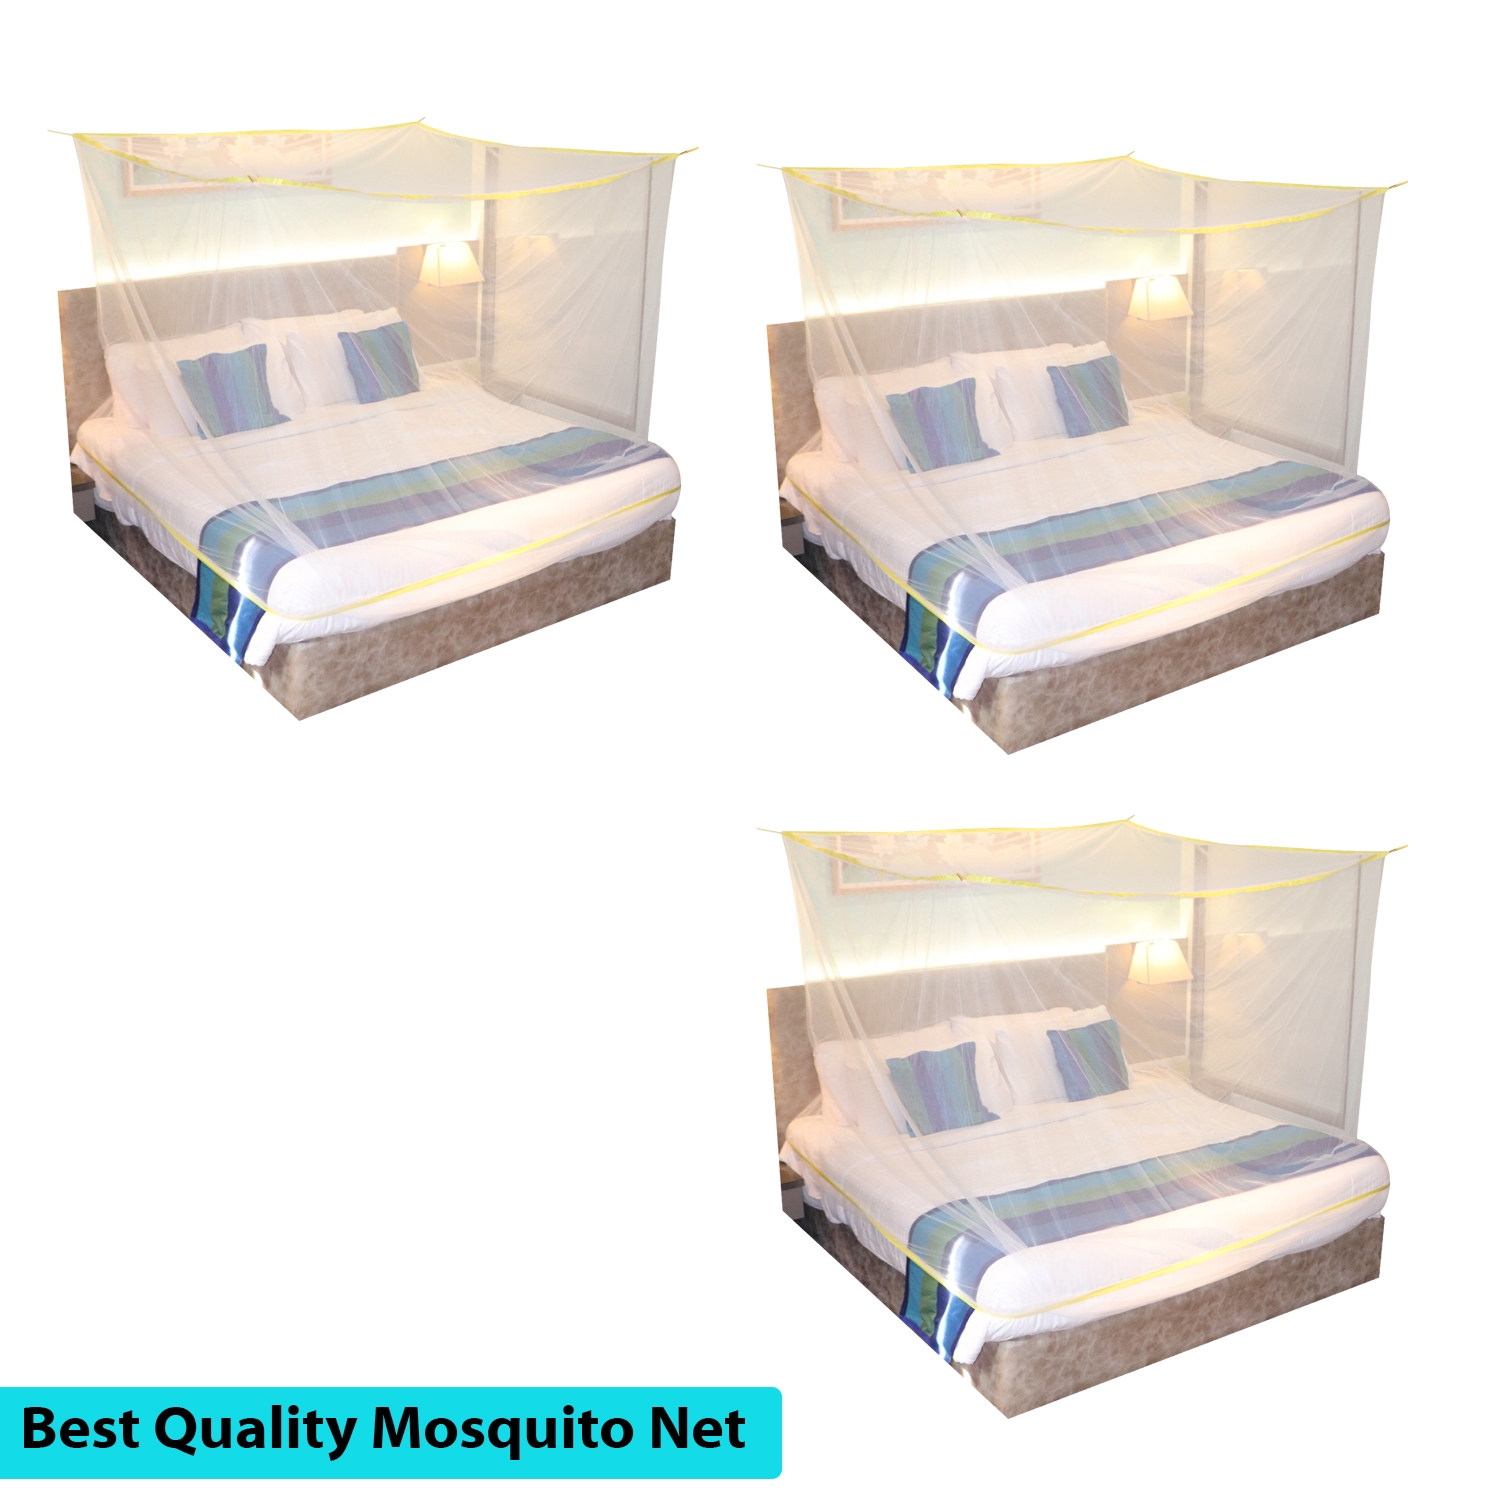 SILVER SHINE | Mosquito Net for Double Bed, King-Size, Square Hanging Foldable Polyester Net White And YellowPack of 3